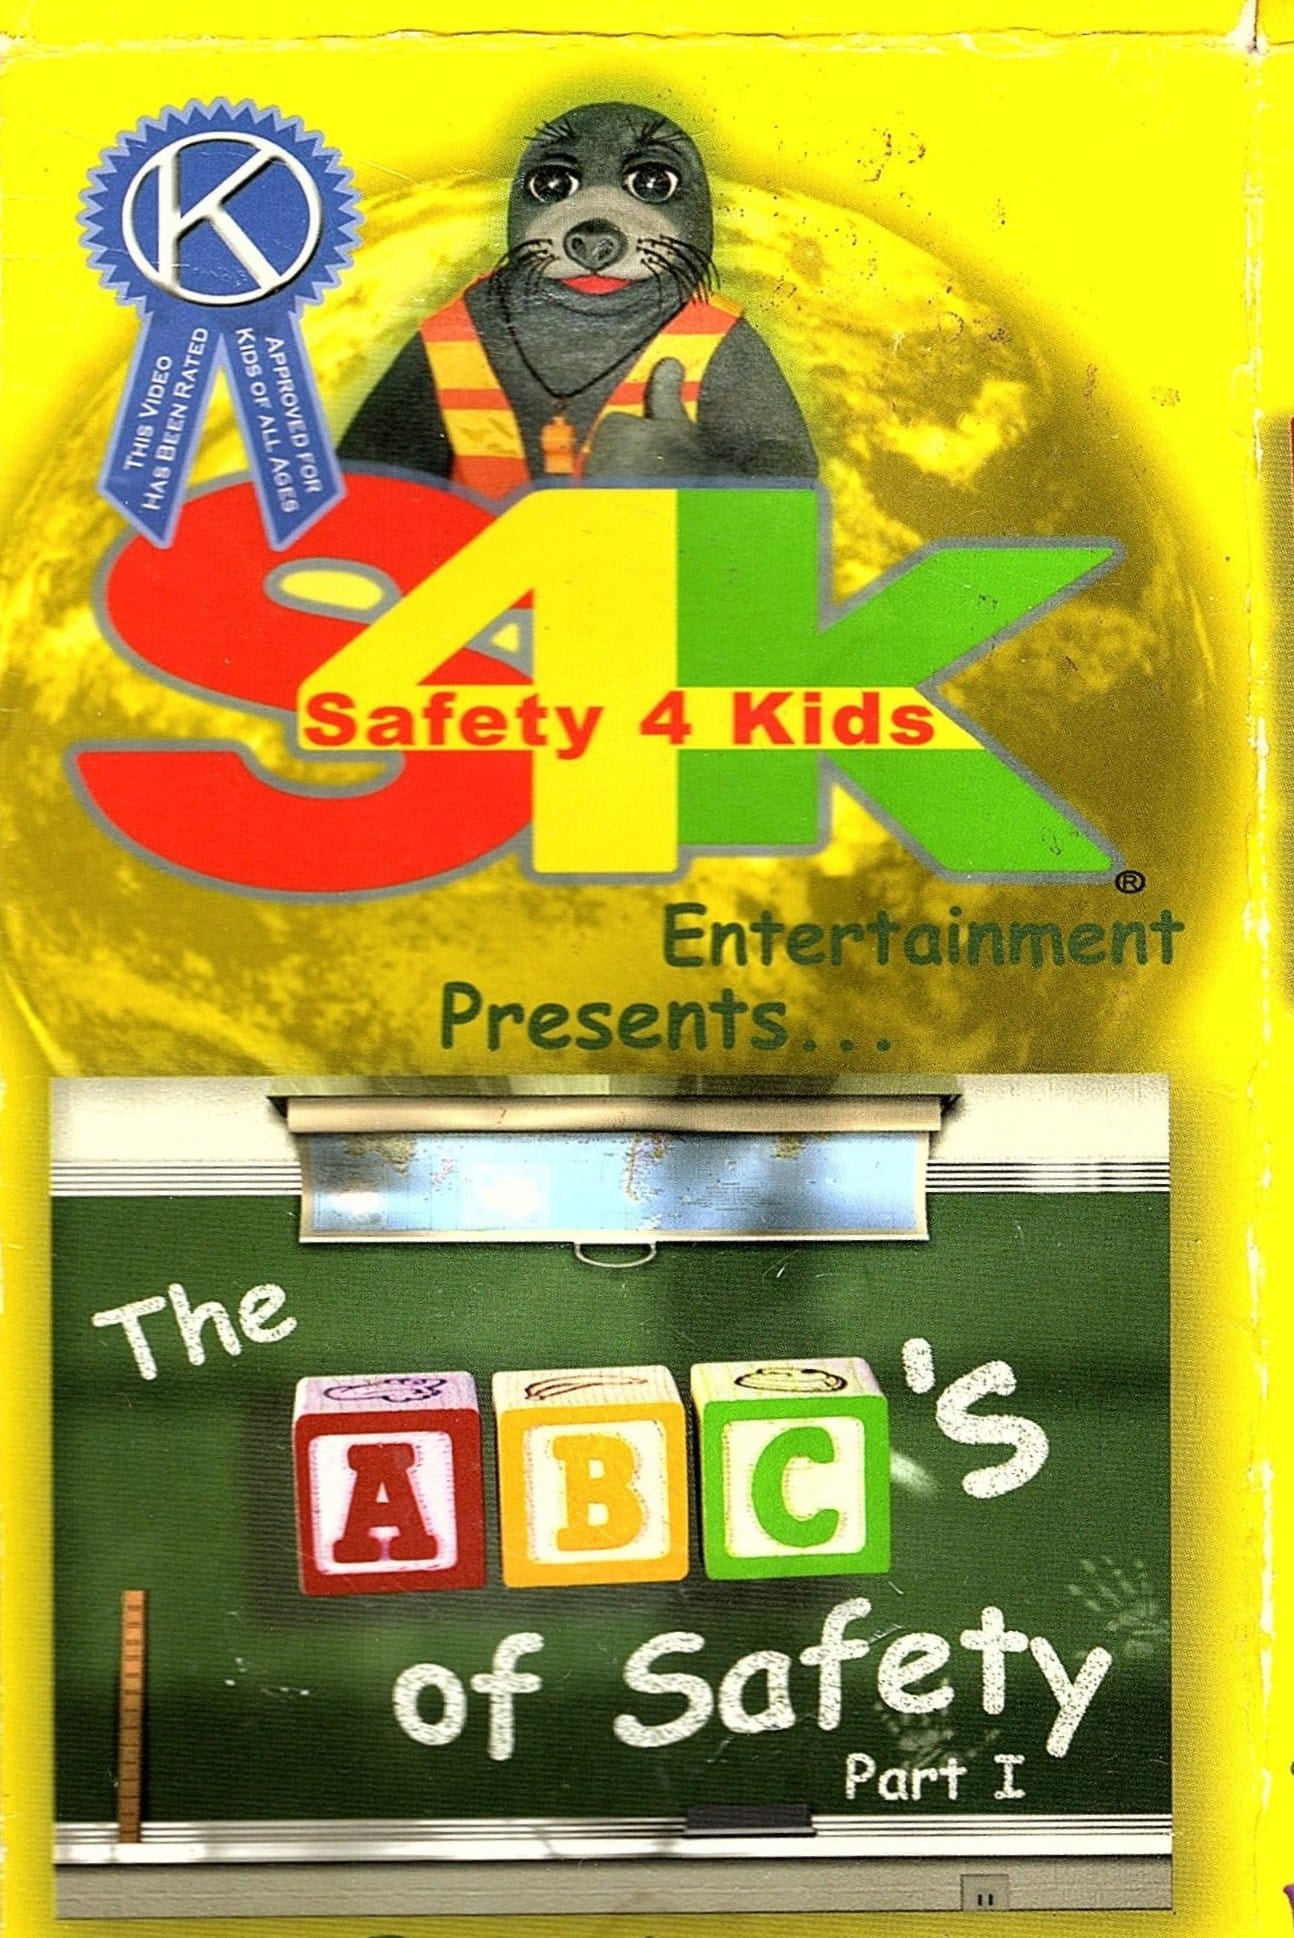 The ABCs of Safety Part I